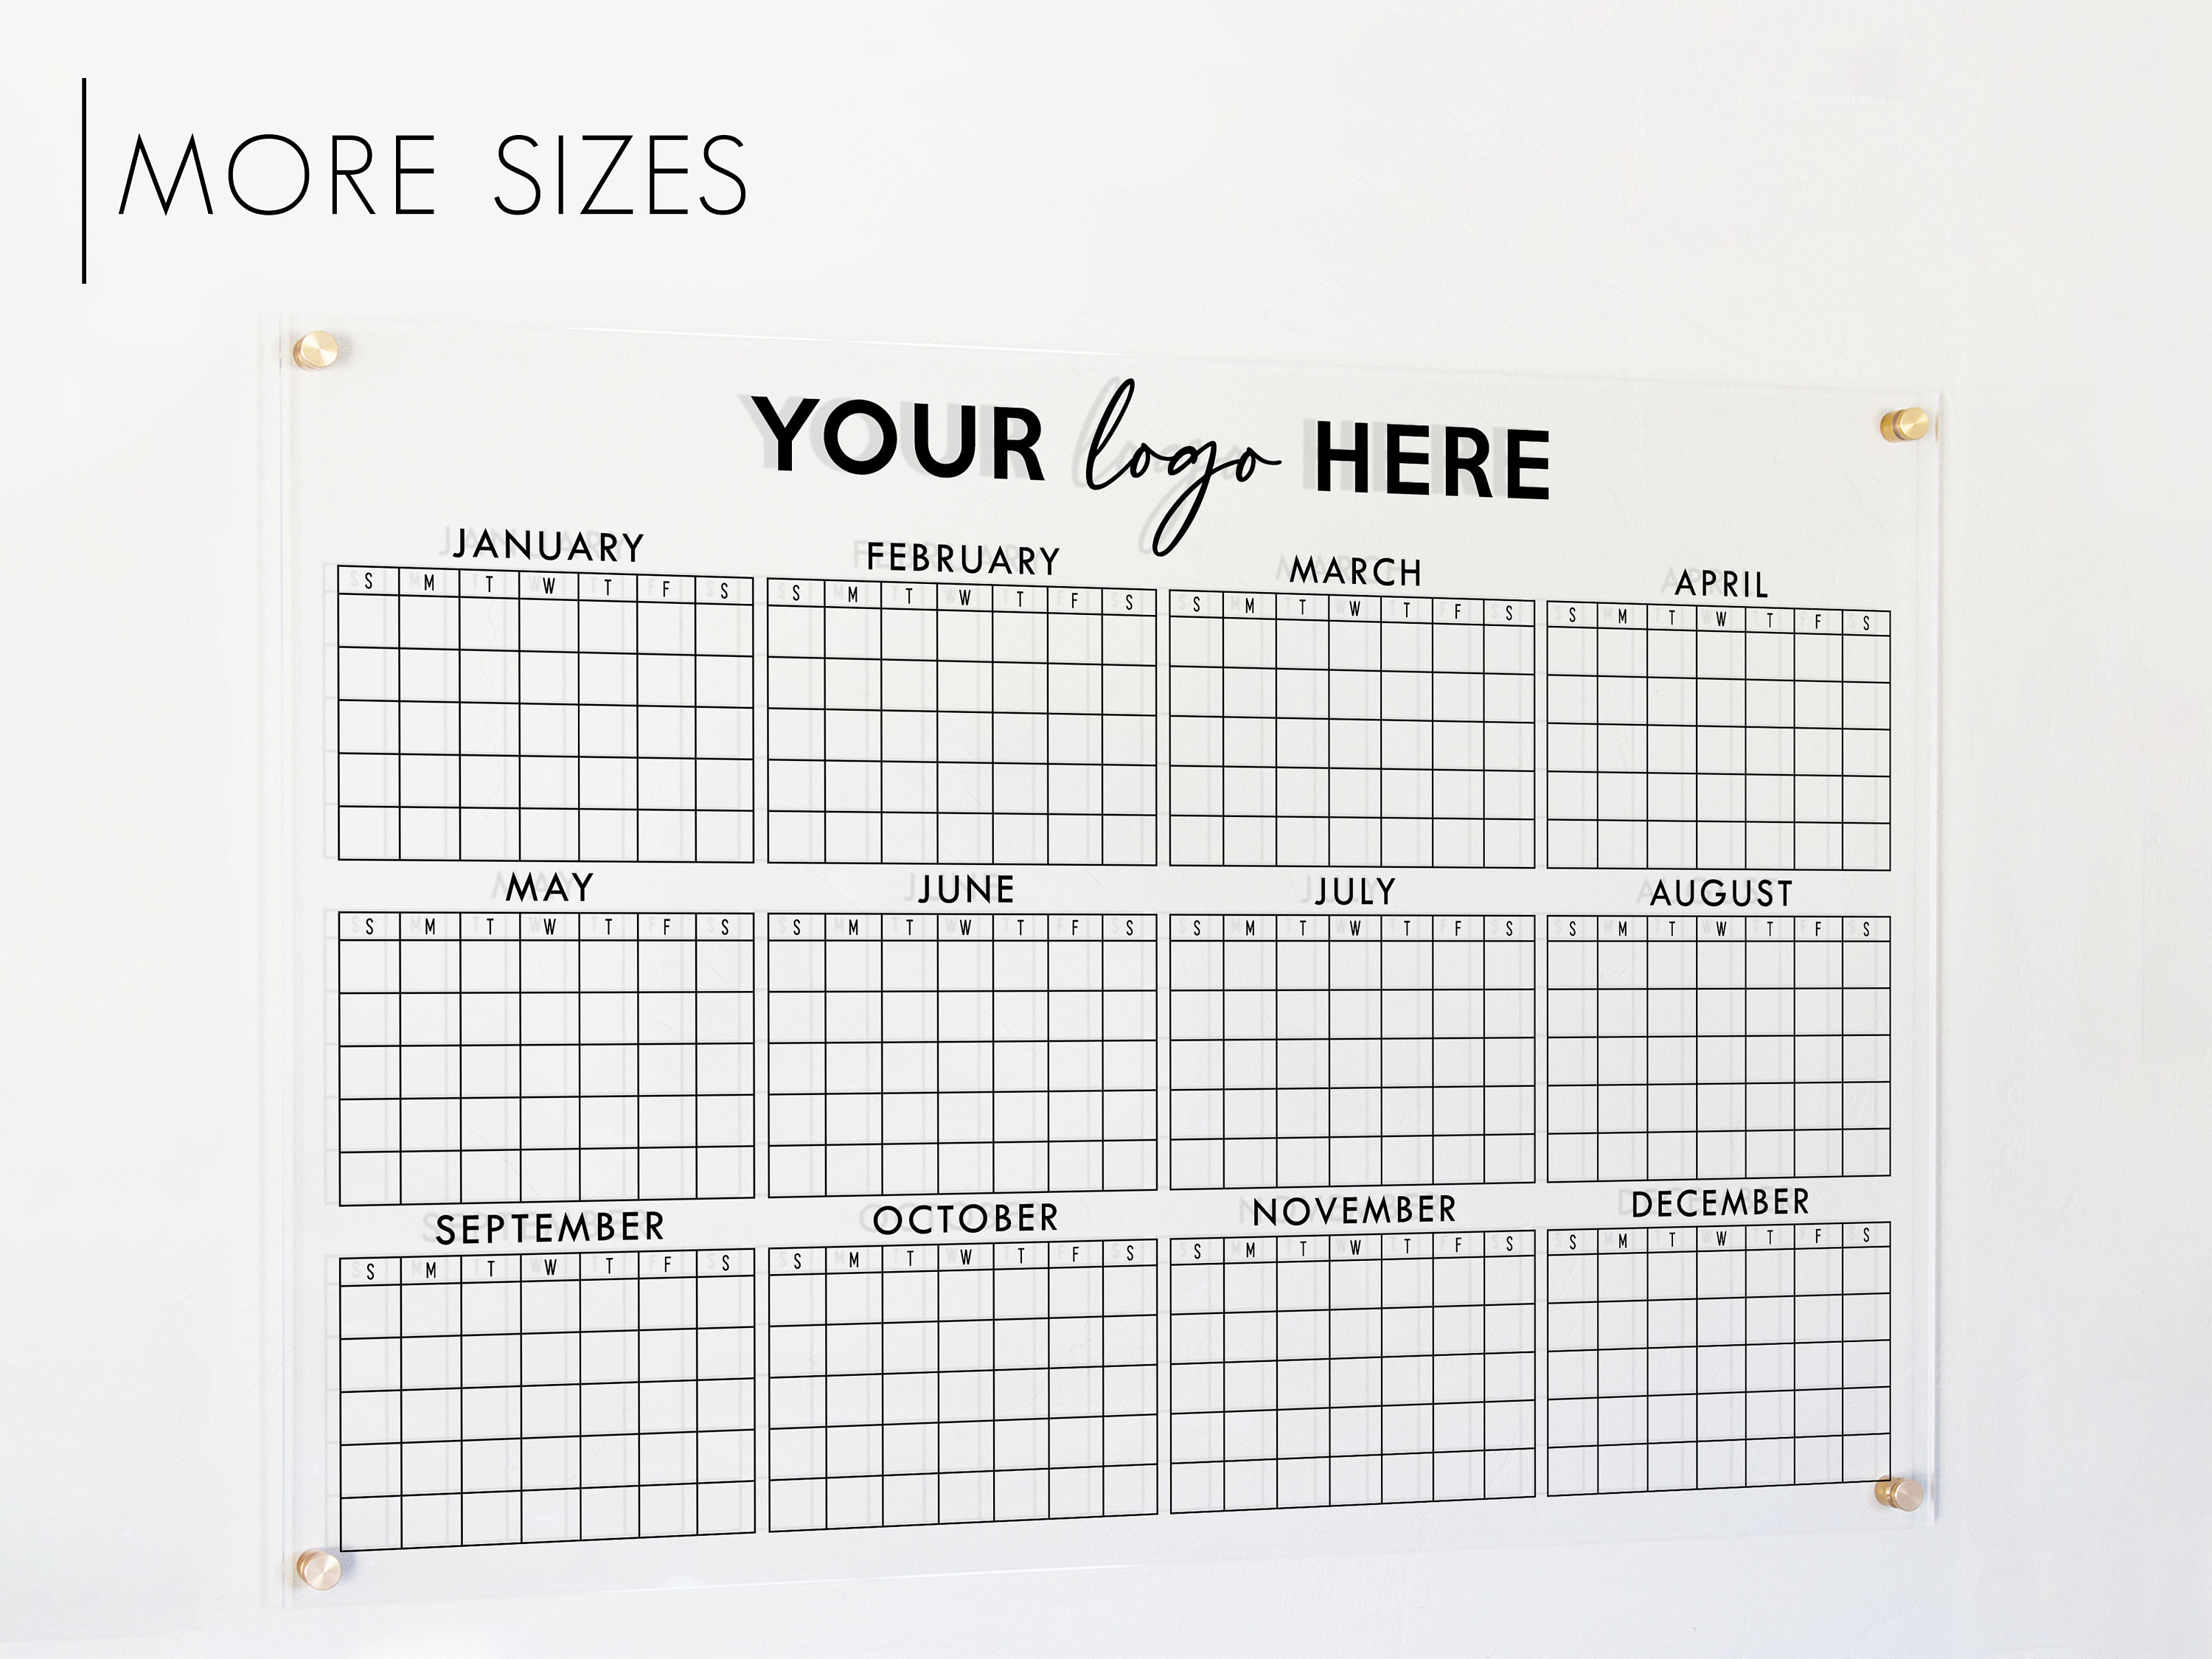 Acrylic calendar can be written and erased. - bpcproduction